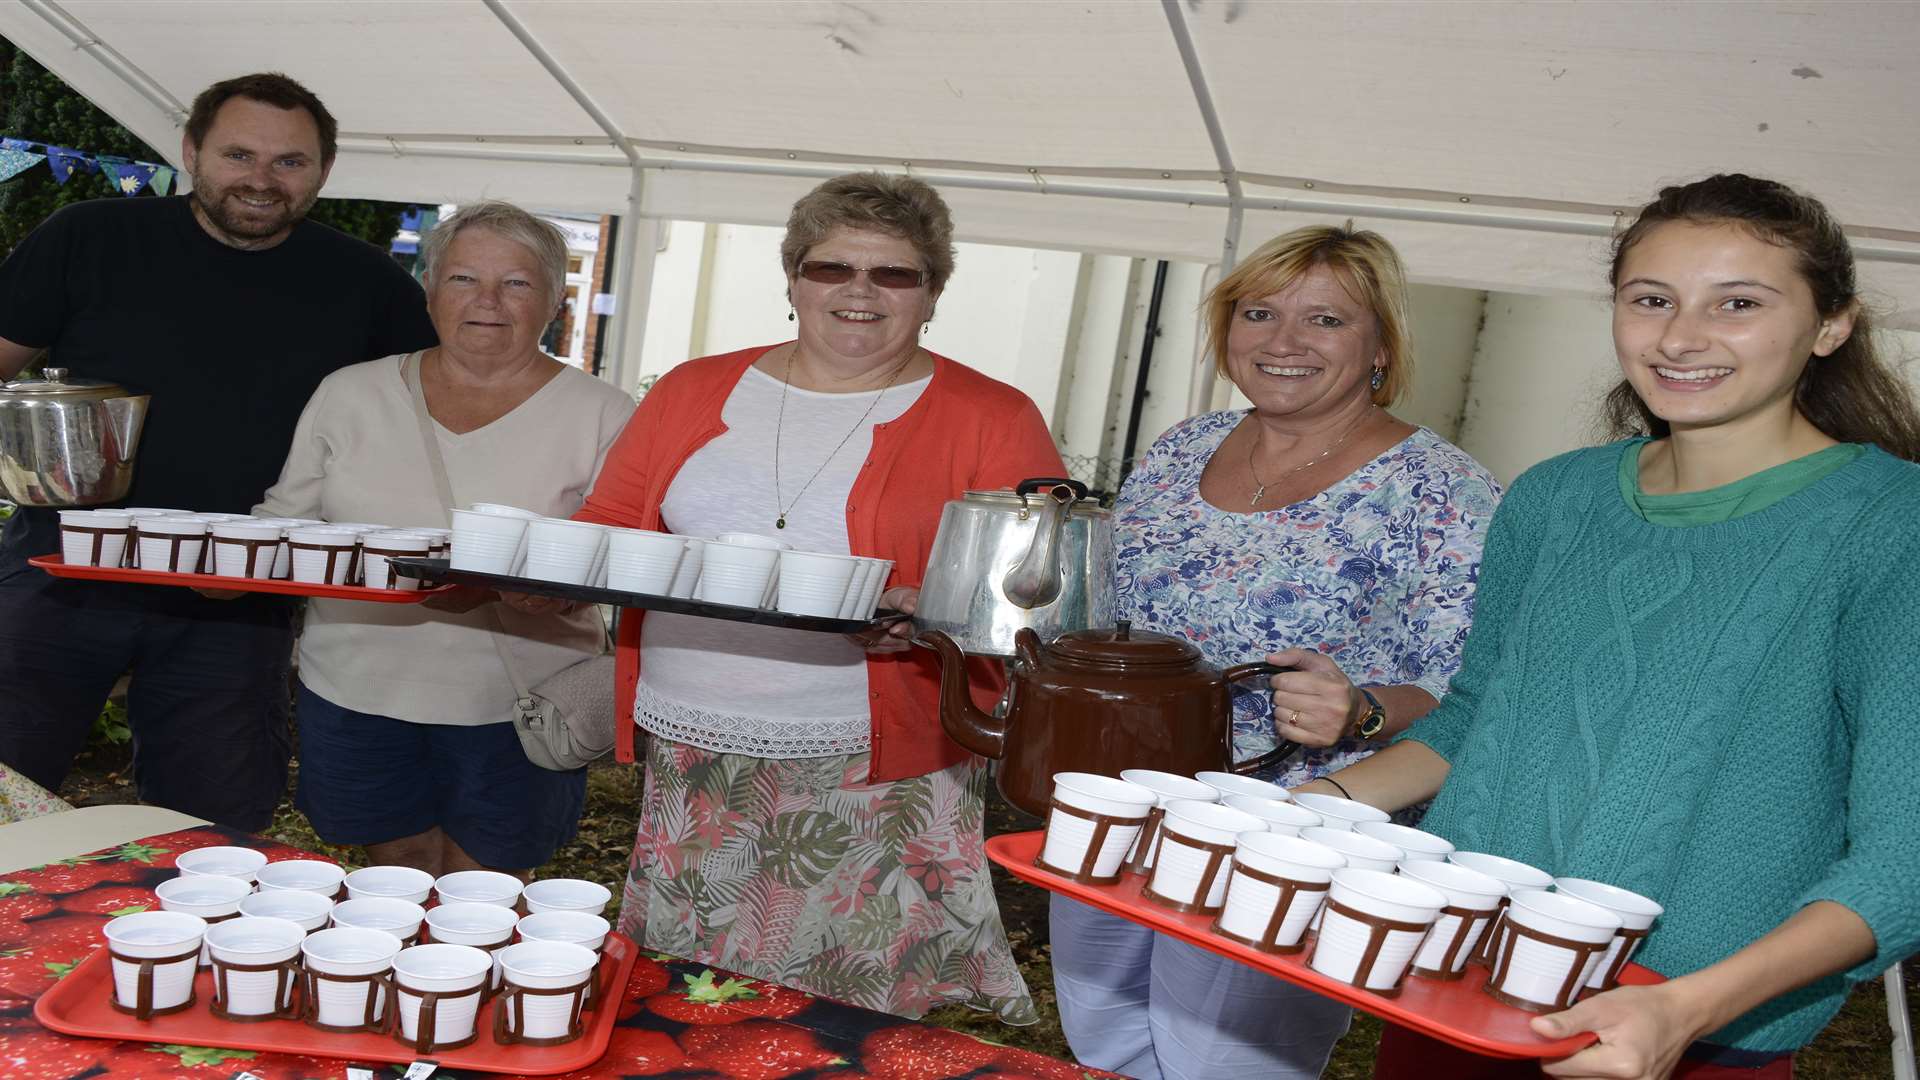 St Georges Church handed out teas and cake, from left, Julian Dewick, Janet Kidney, Jean Pique, Liz Heaver and Miriam Smart